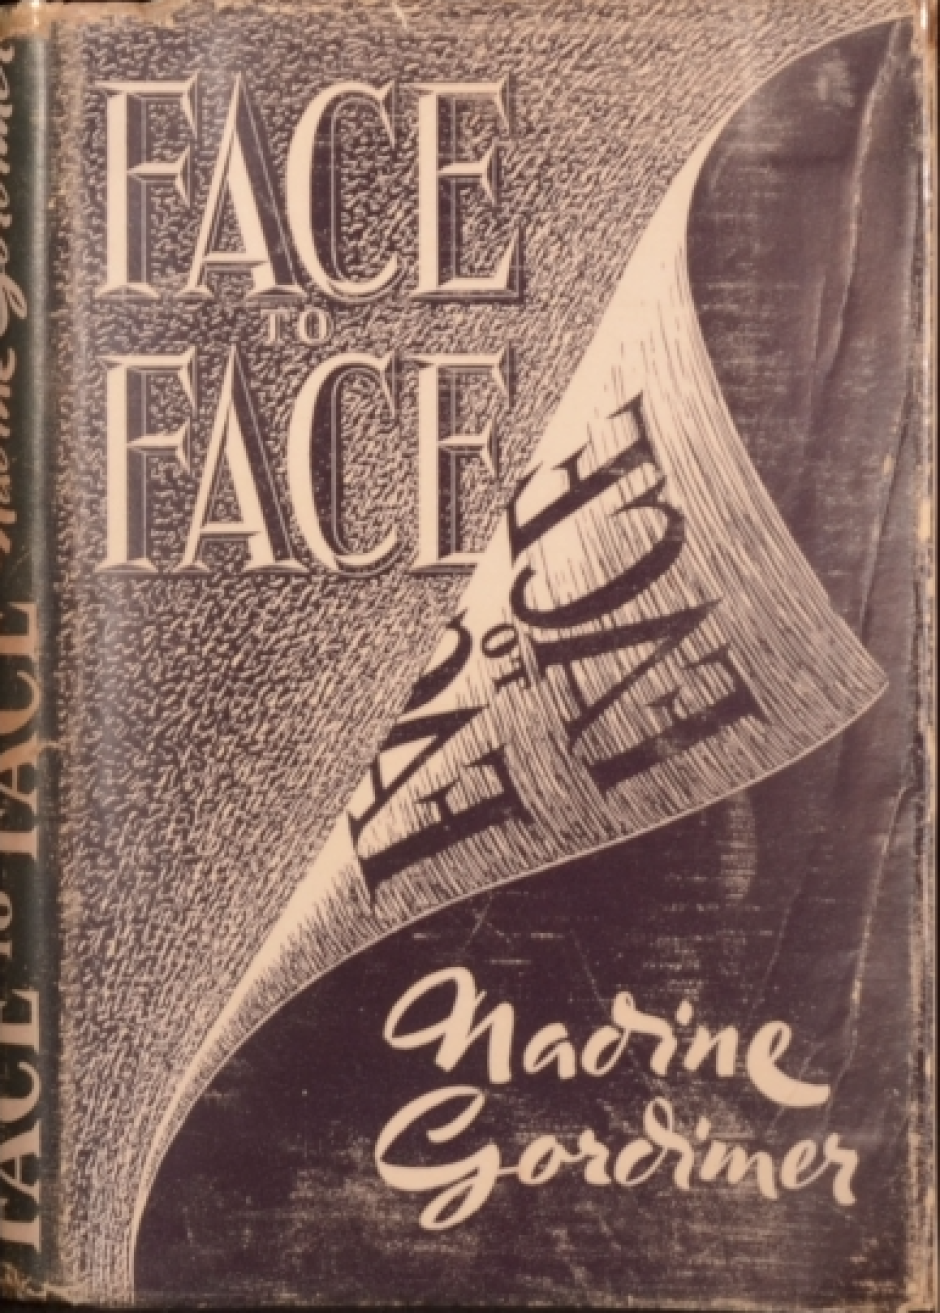 Face to face (1949)